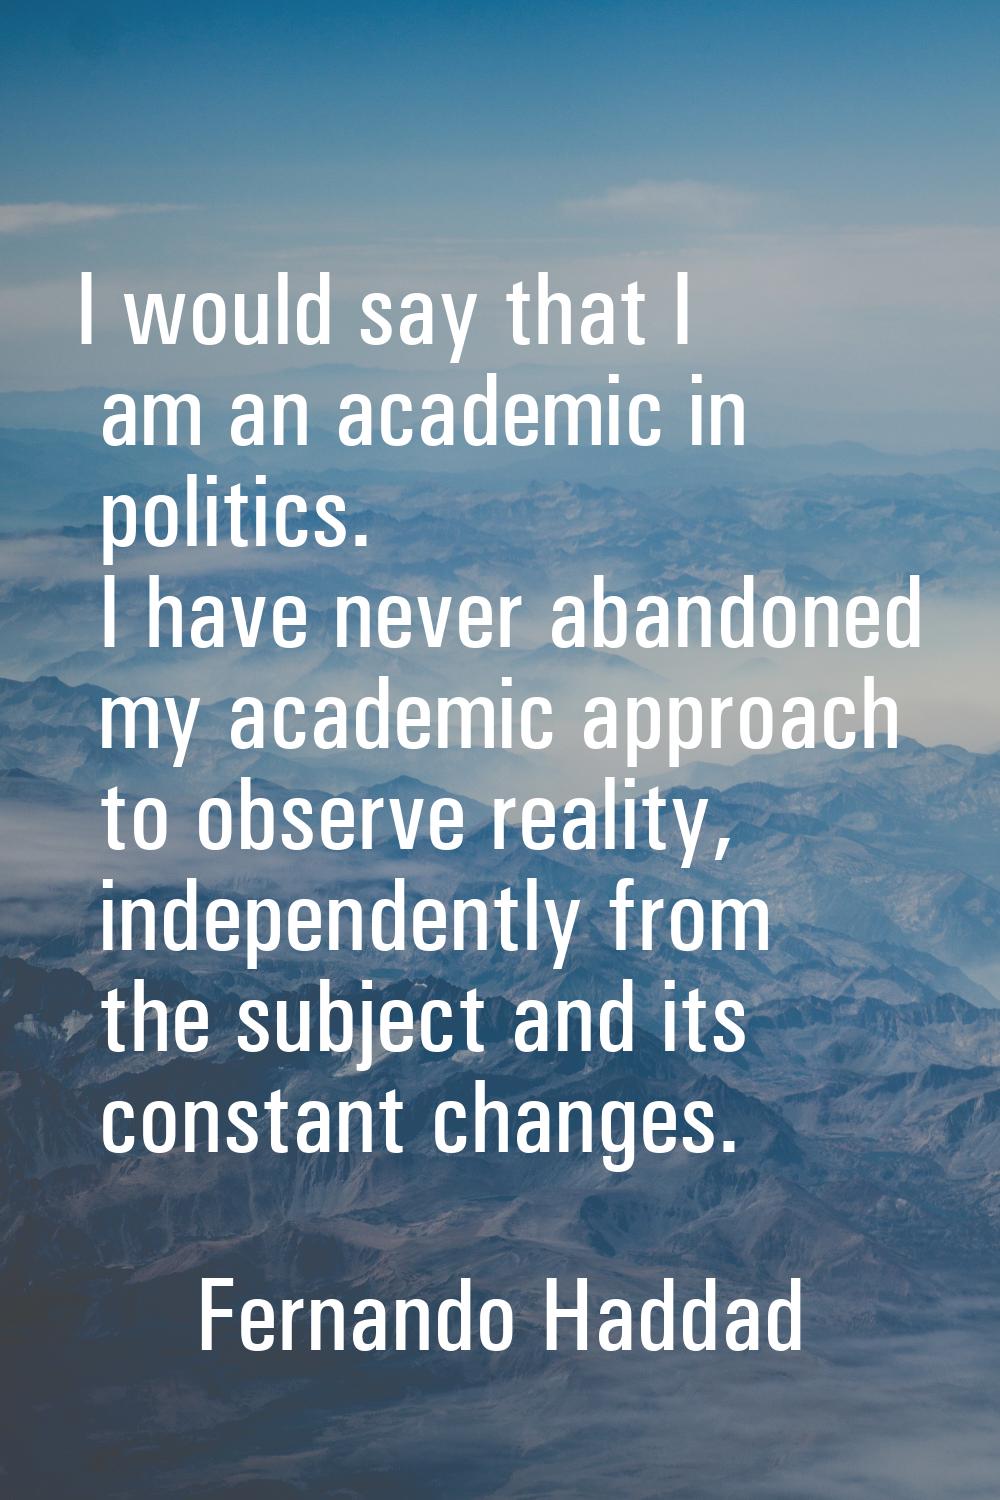 I would say that I am an academic in politics. I have never abandoned my academic approach to obser